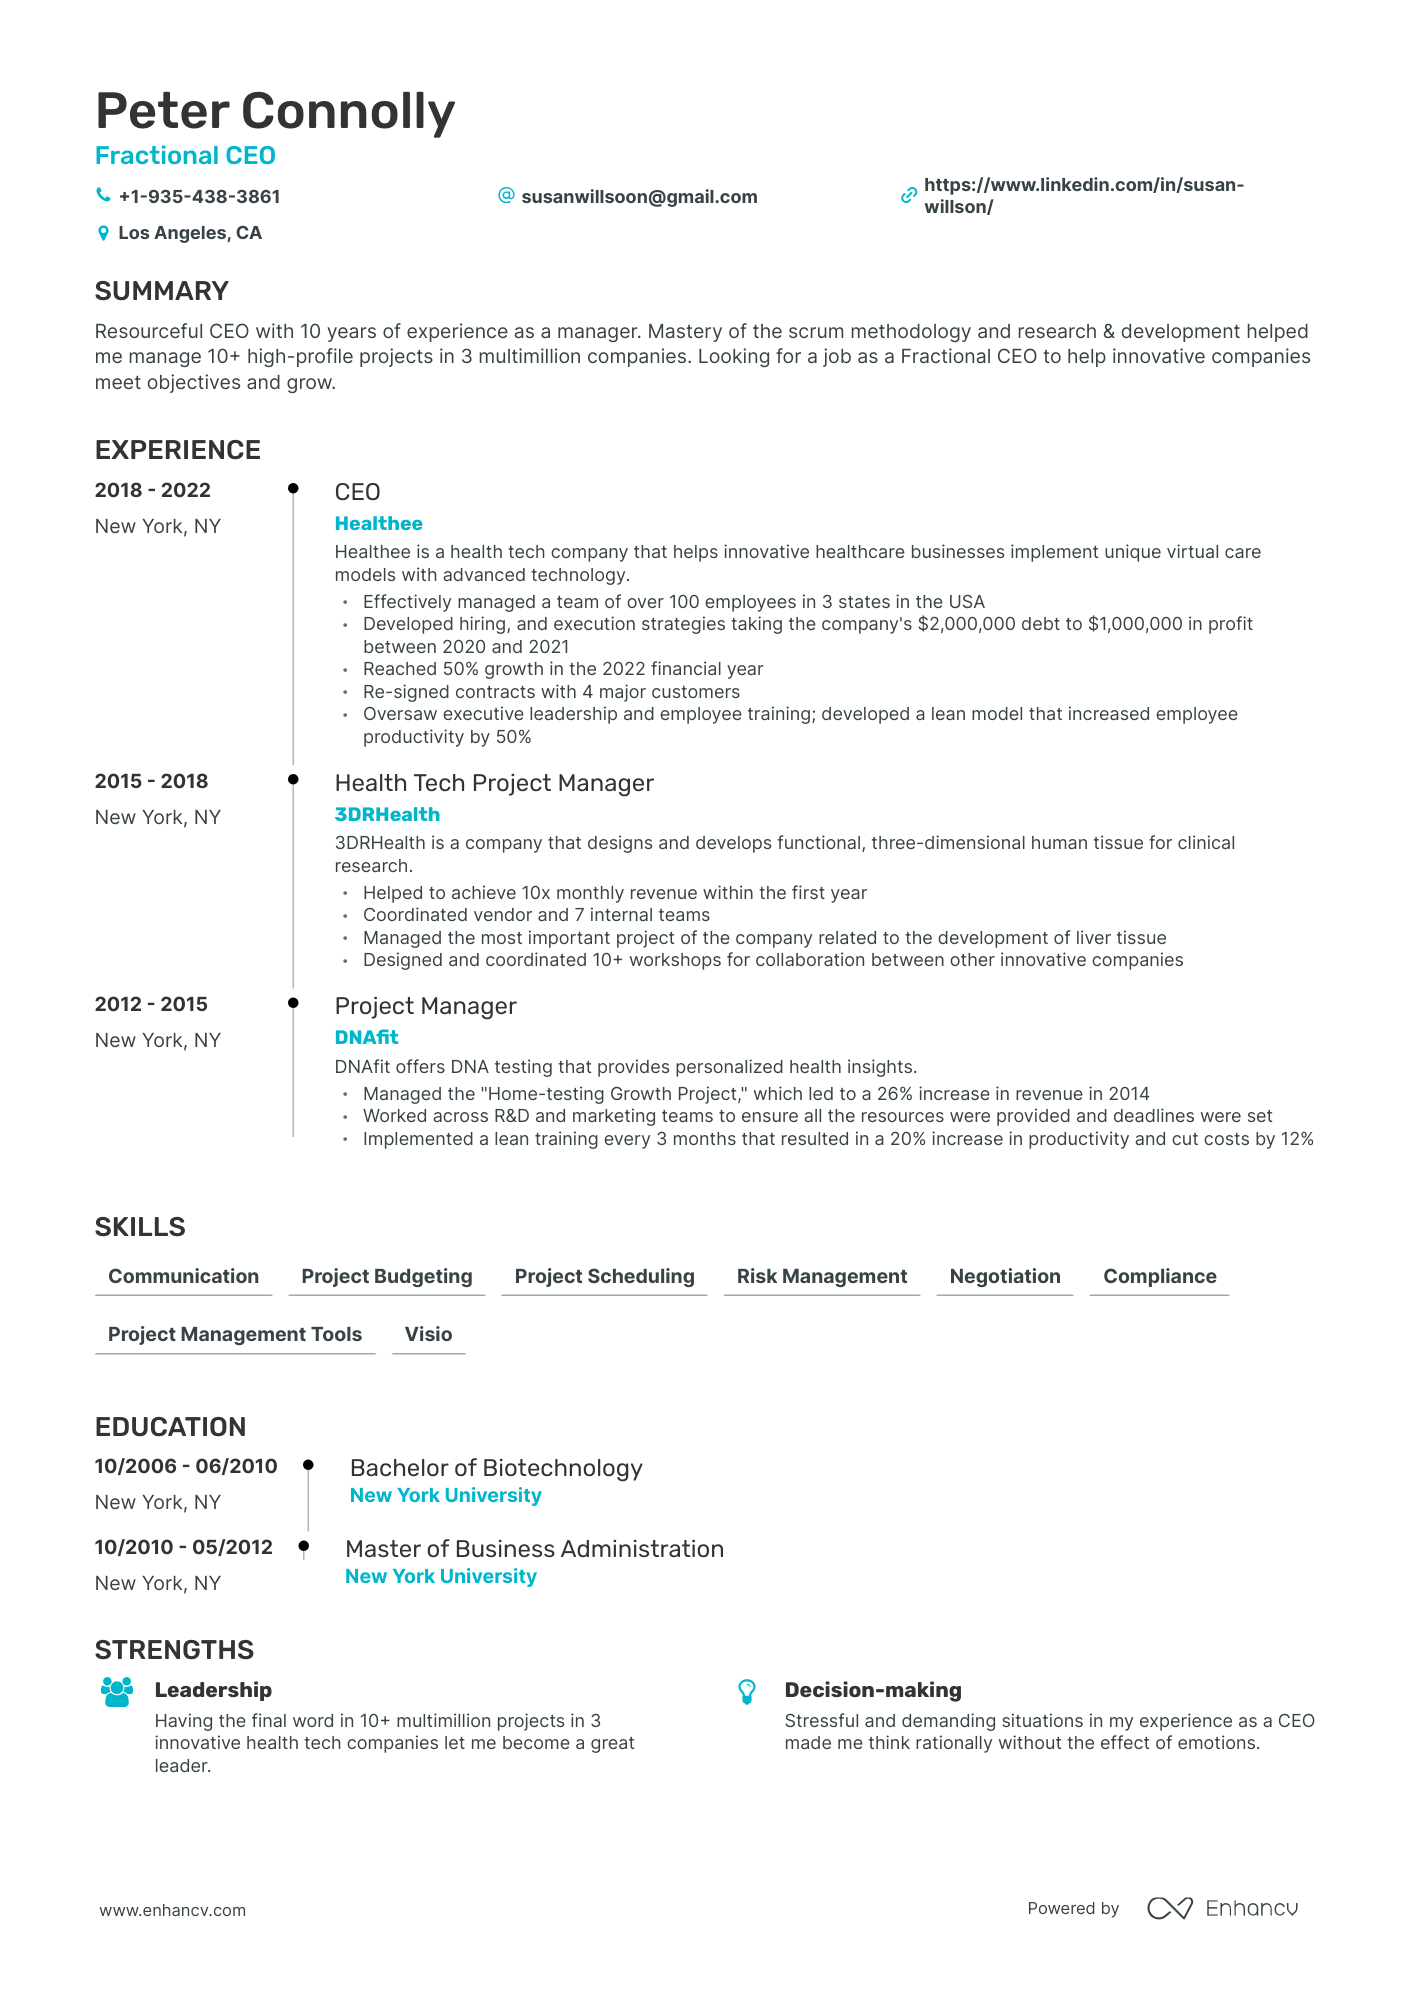 Timeline Fractional CEO Resume Template